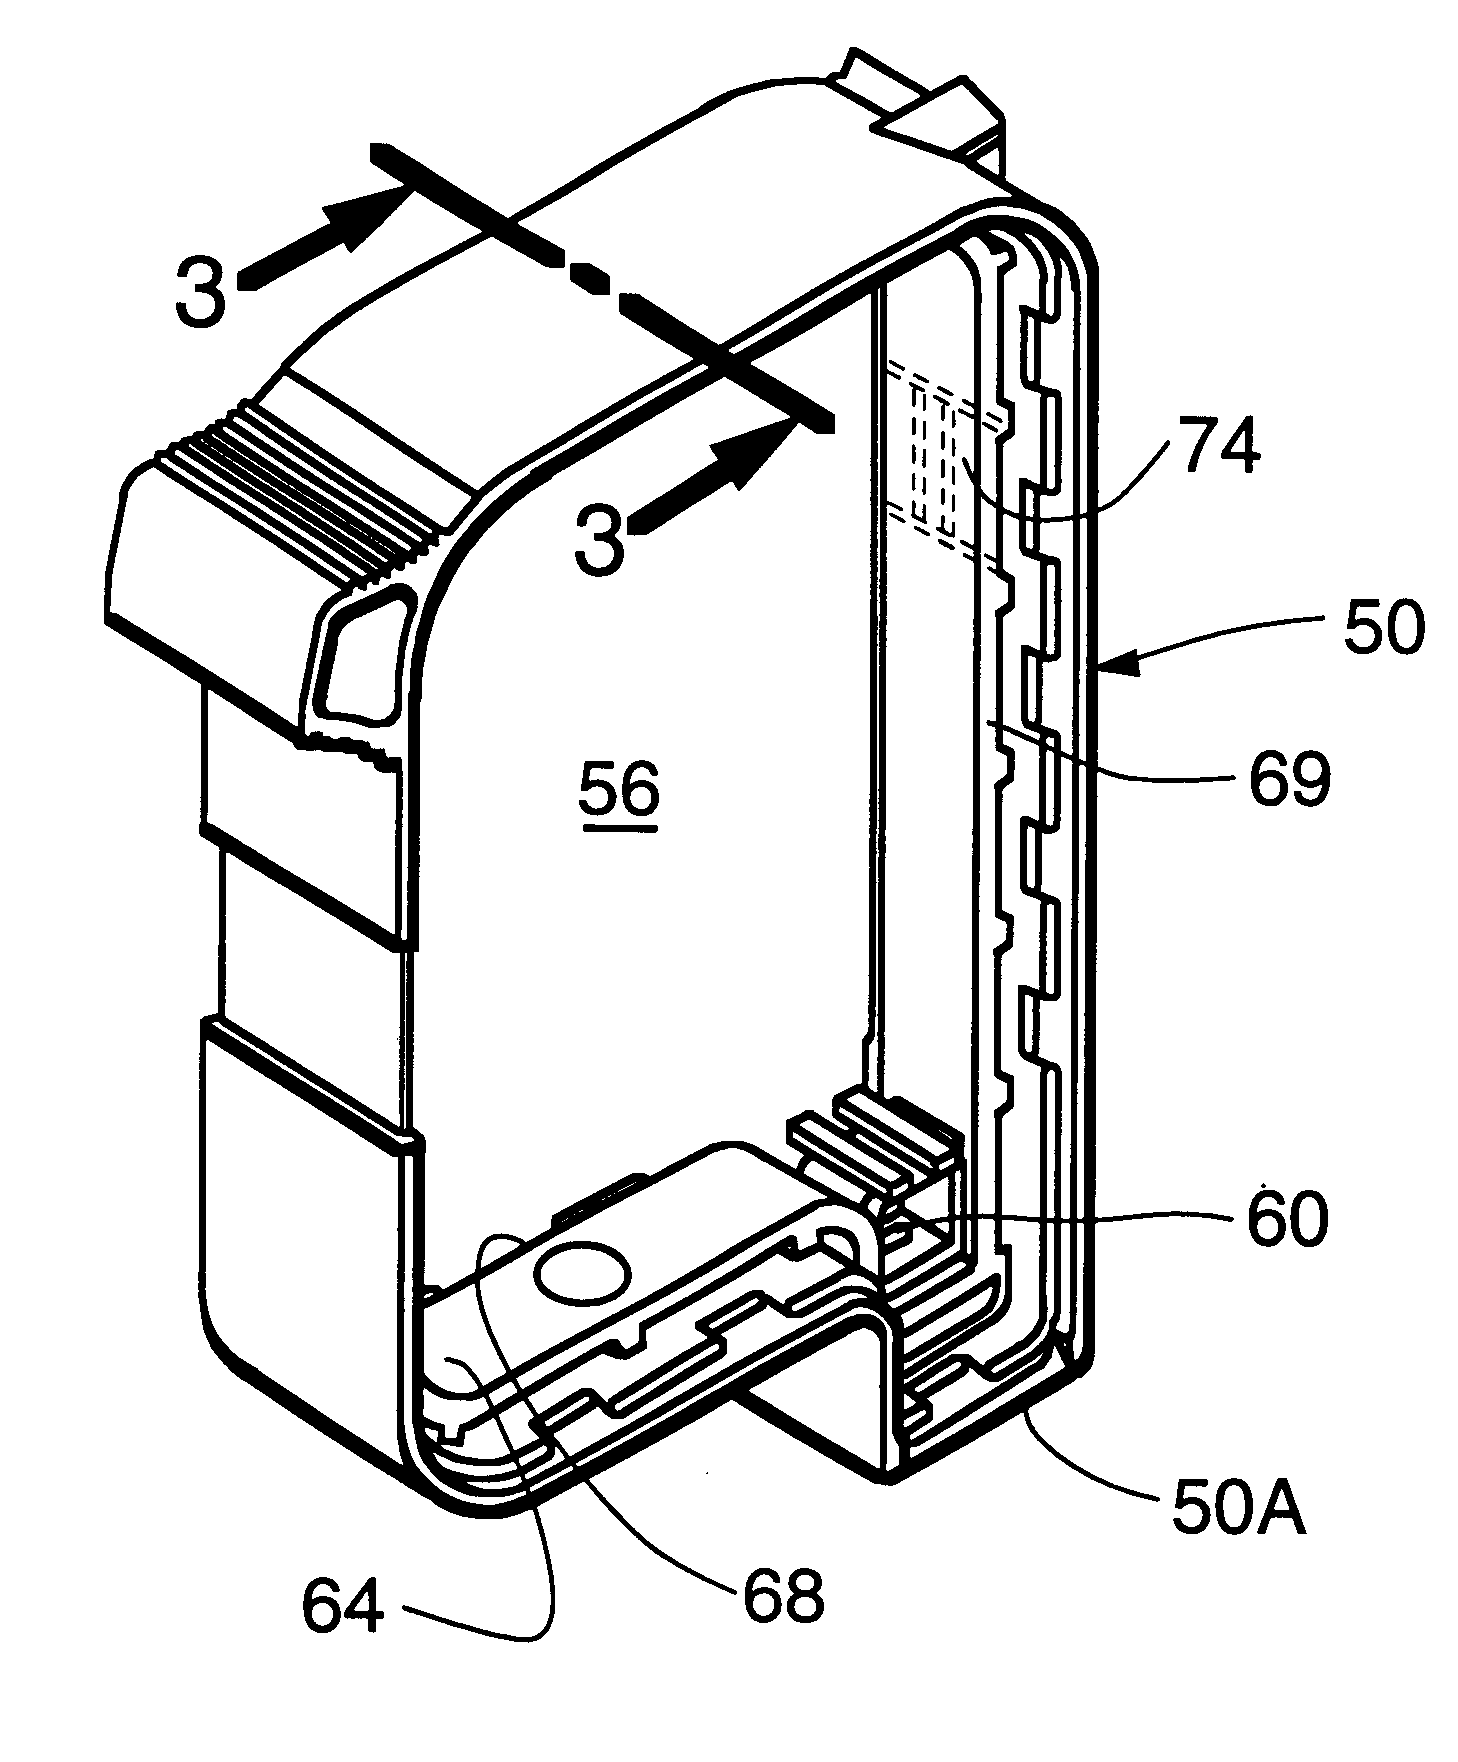 Print head cartridge and method of making a print head cartridge by one-shot injection molding